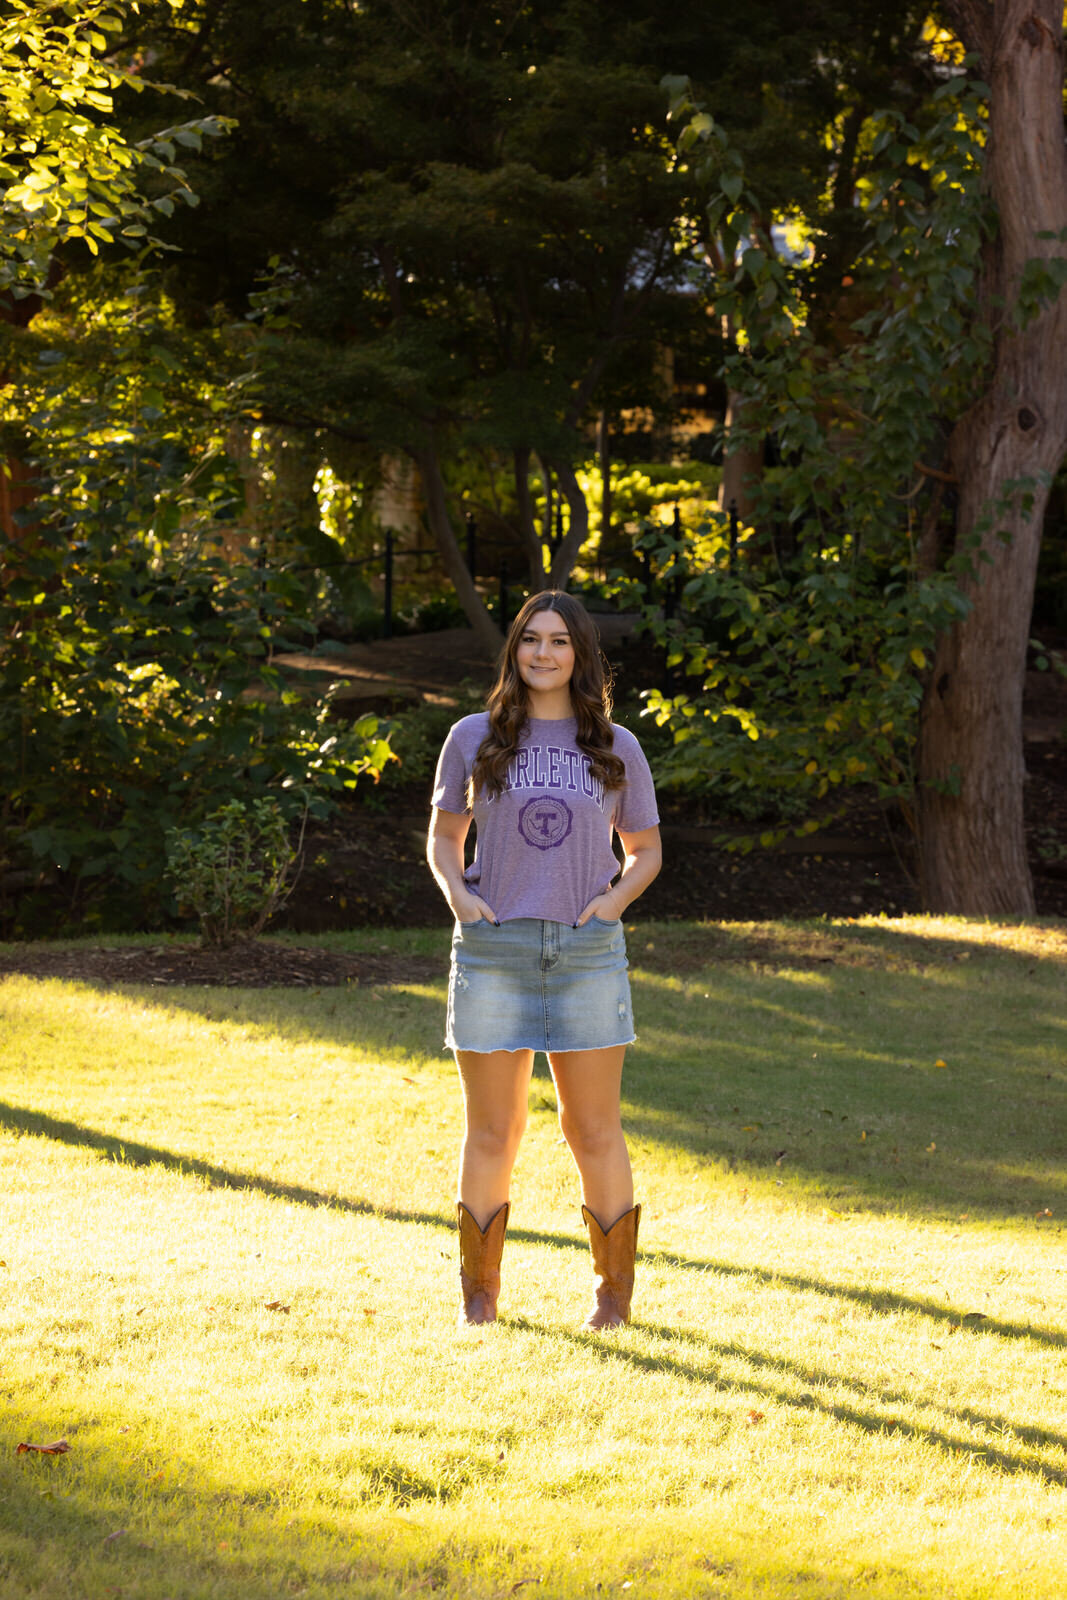 senior-girl-standing-with-boots-in-grass-in-sun